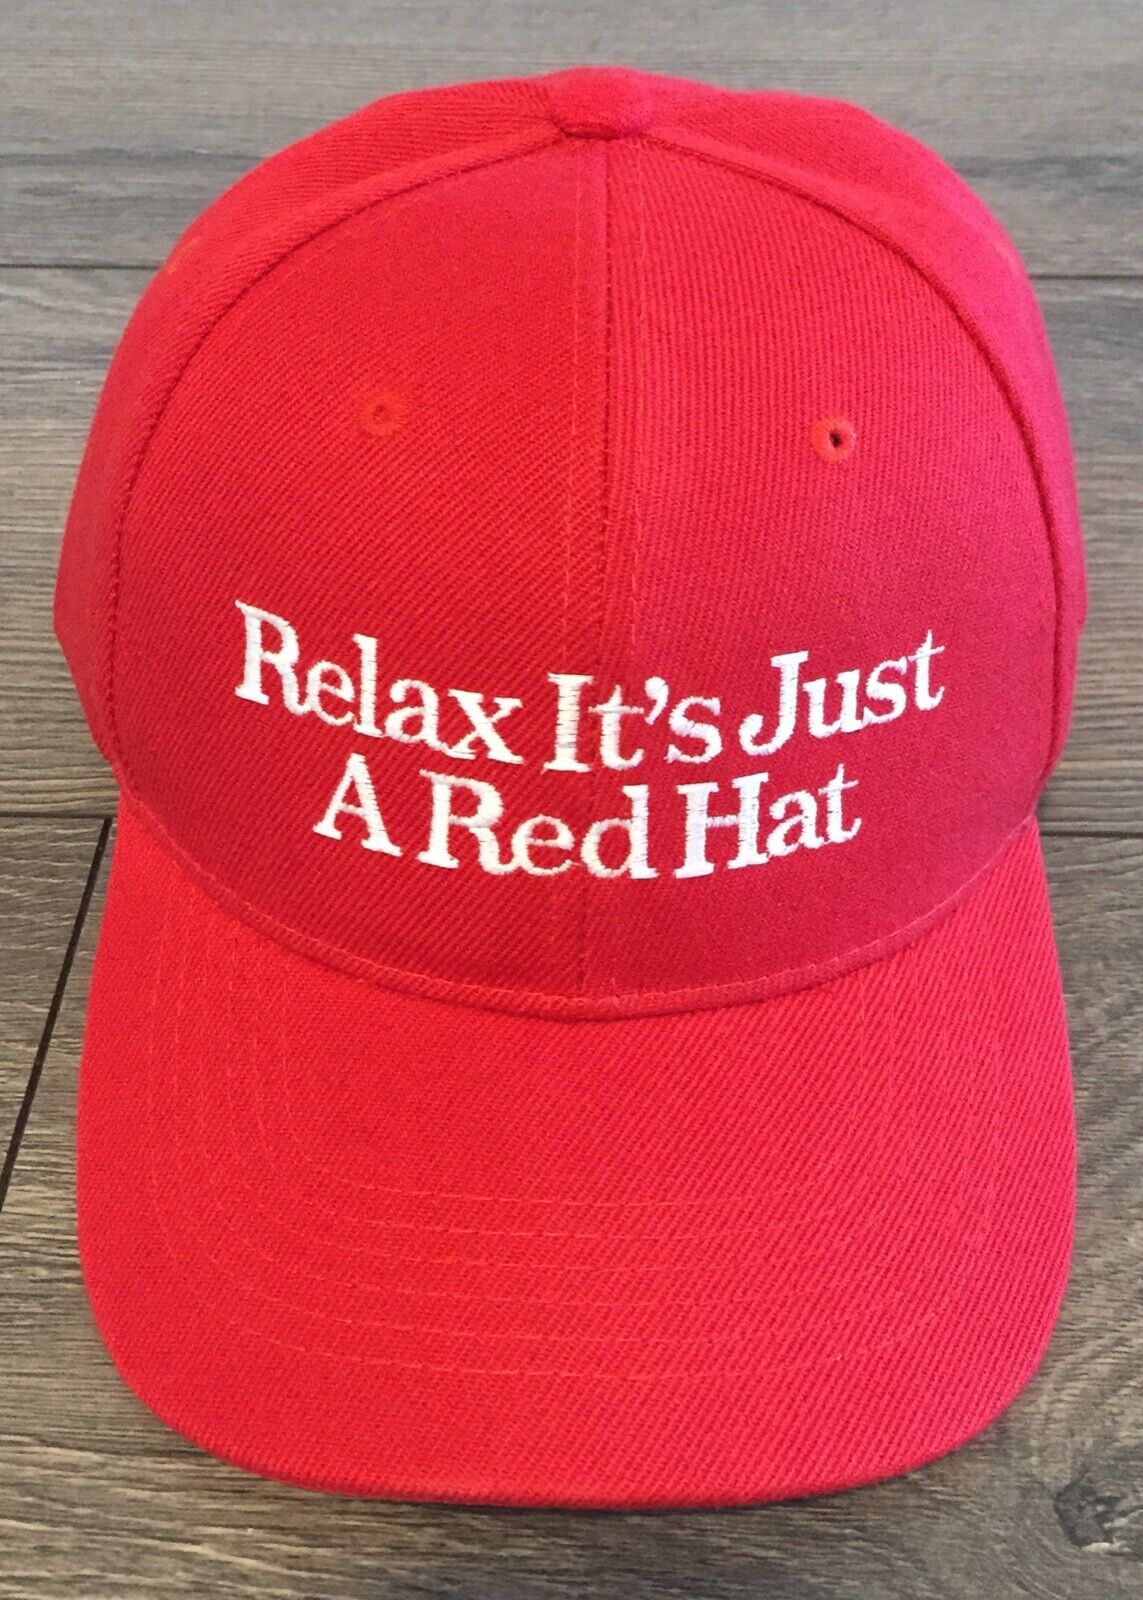 Relax It’s Just A Red Hat MAGA Hat TRUMP 2024 MAKE AMERICA GREAT AGAIN Cap USA